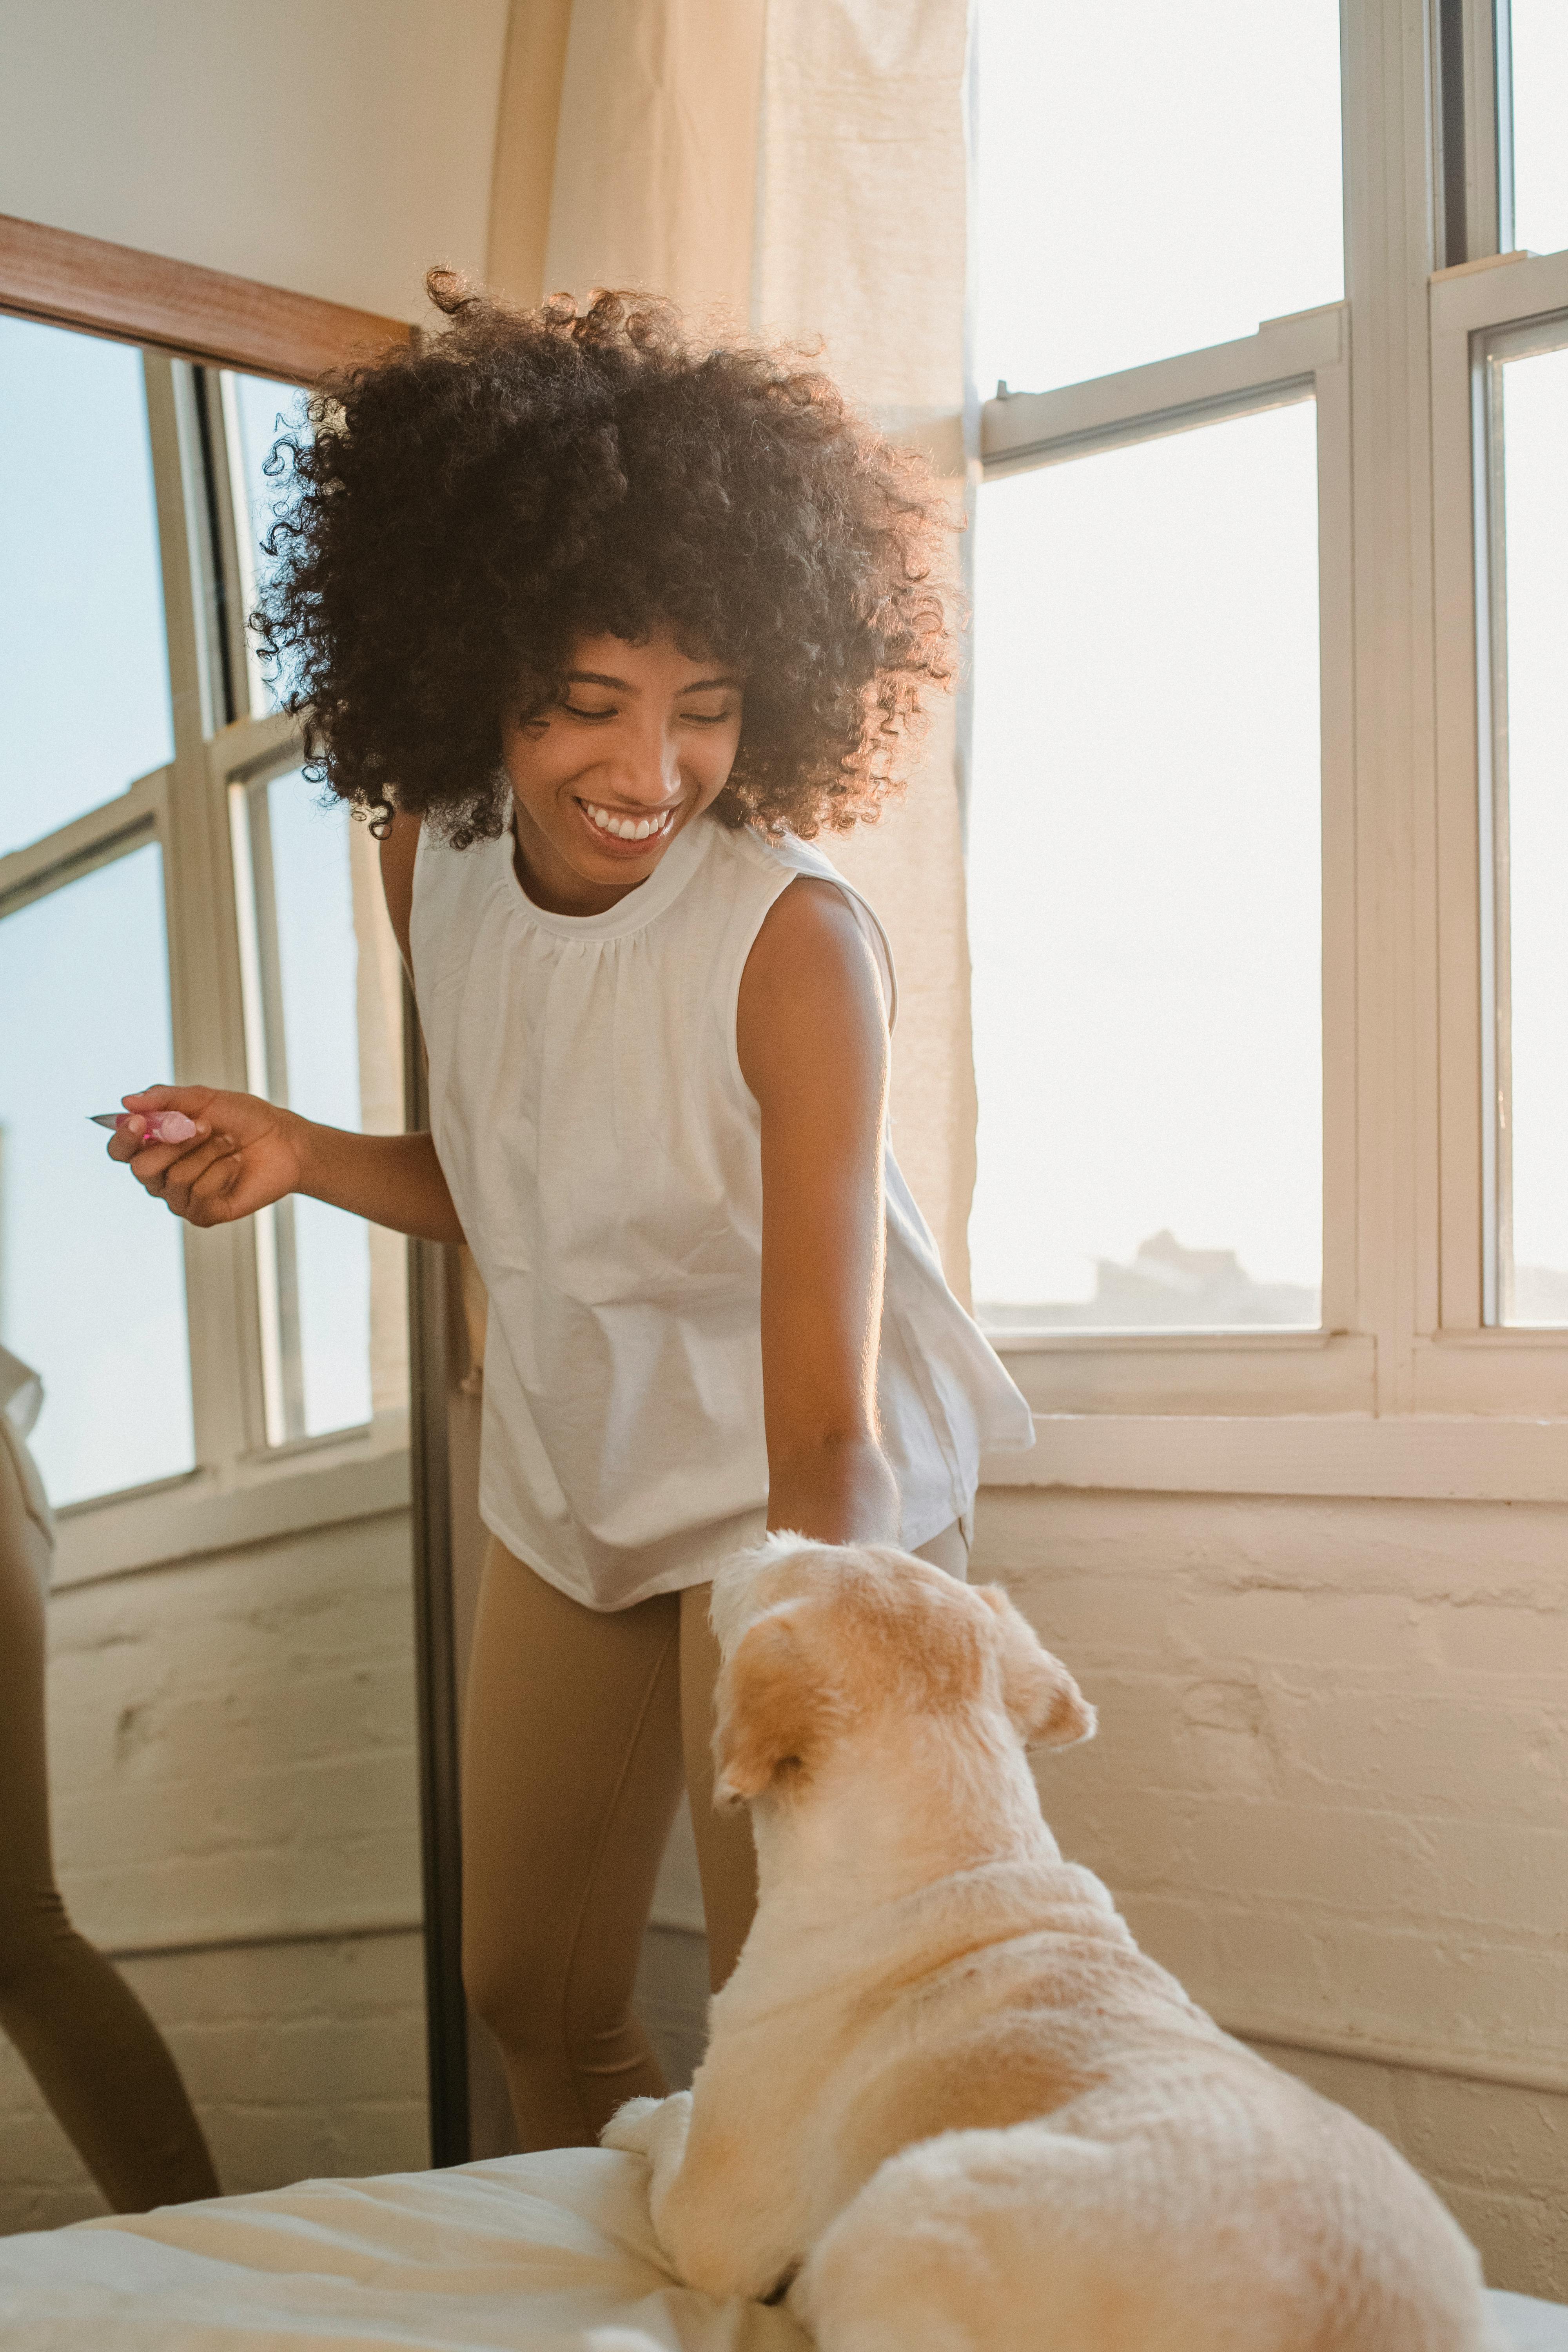 A woman smiling at her dog | Source: Pexels